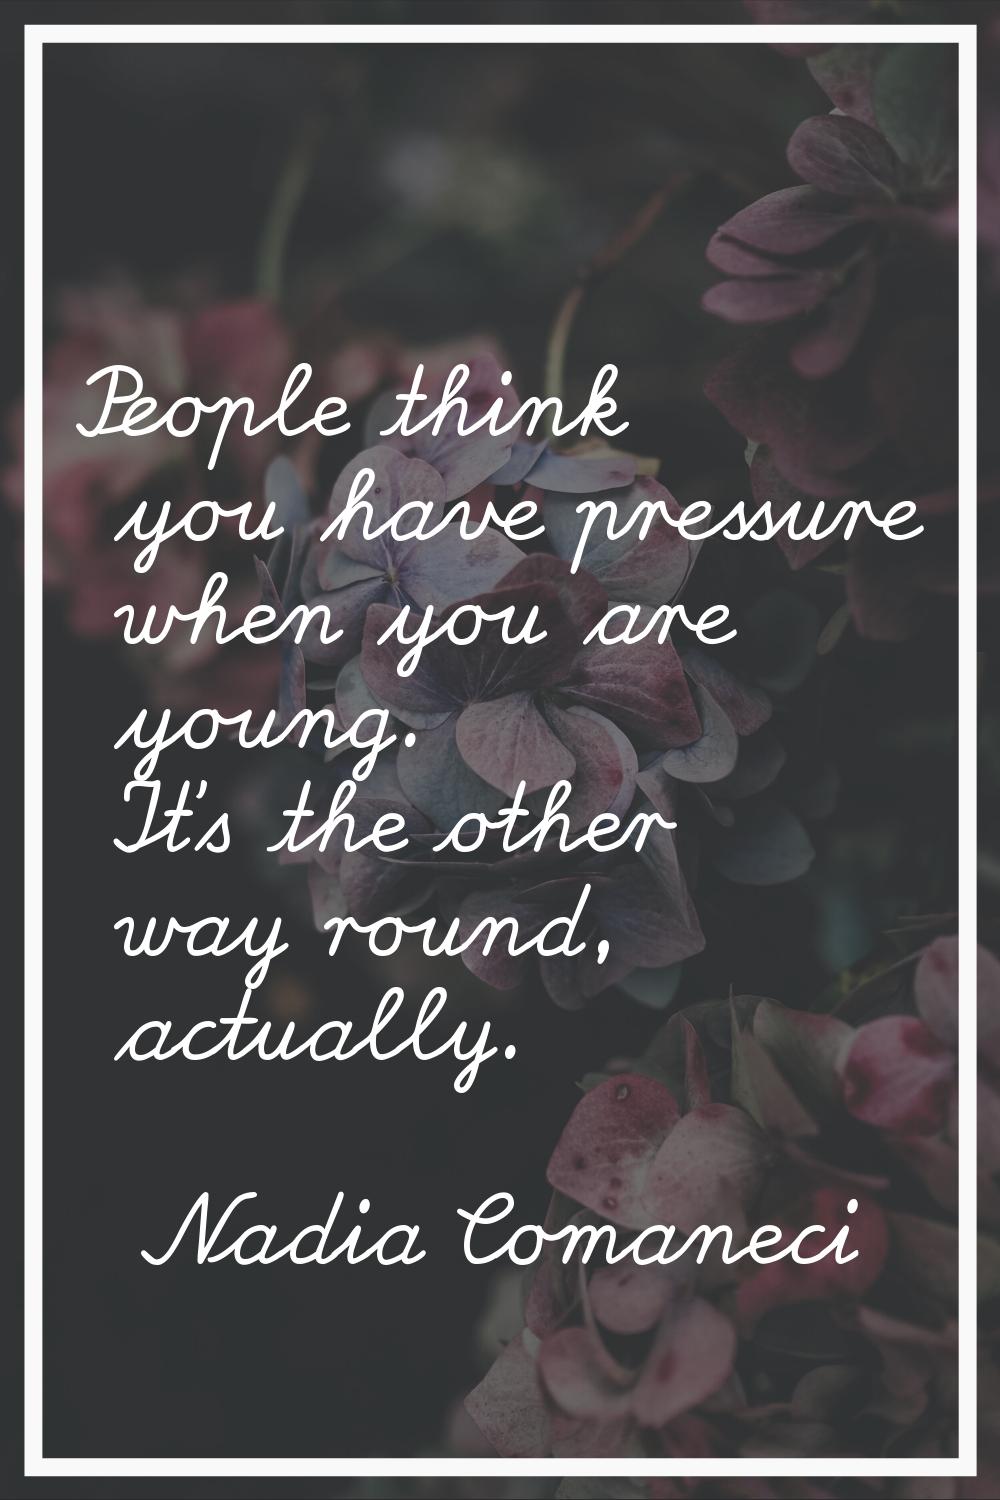 People think you have pressure when you are young. It's the other way round, actually.